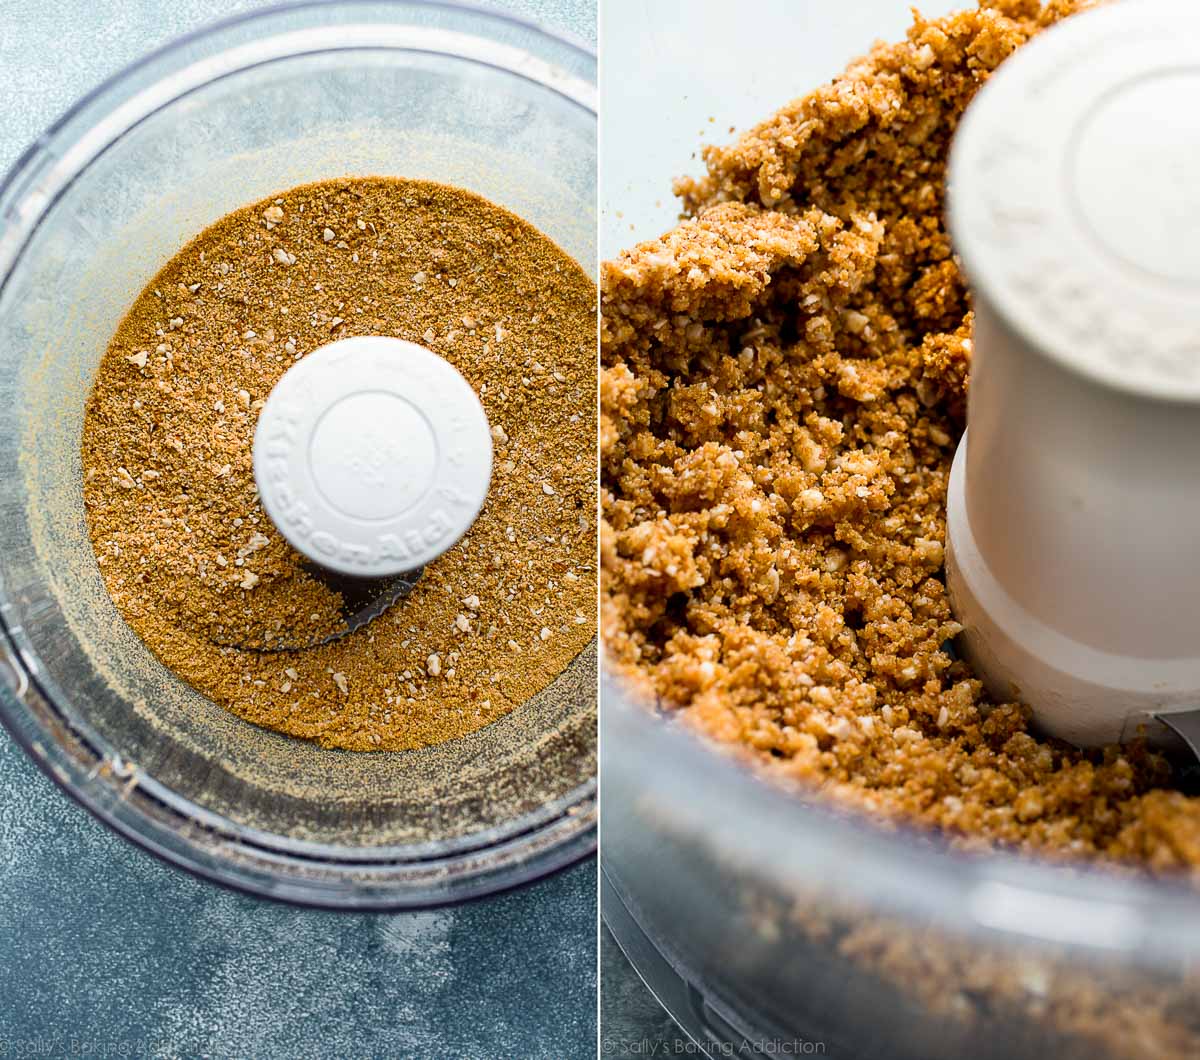 2 images of graham cracker crumbs in a food processor and crust mixture in a food processor